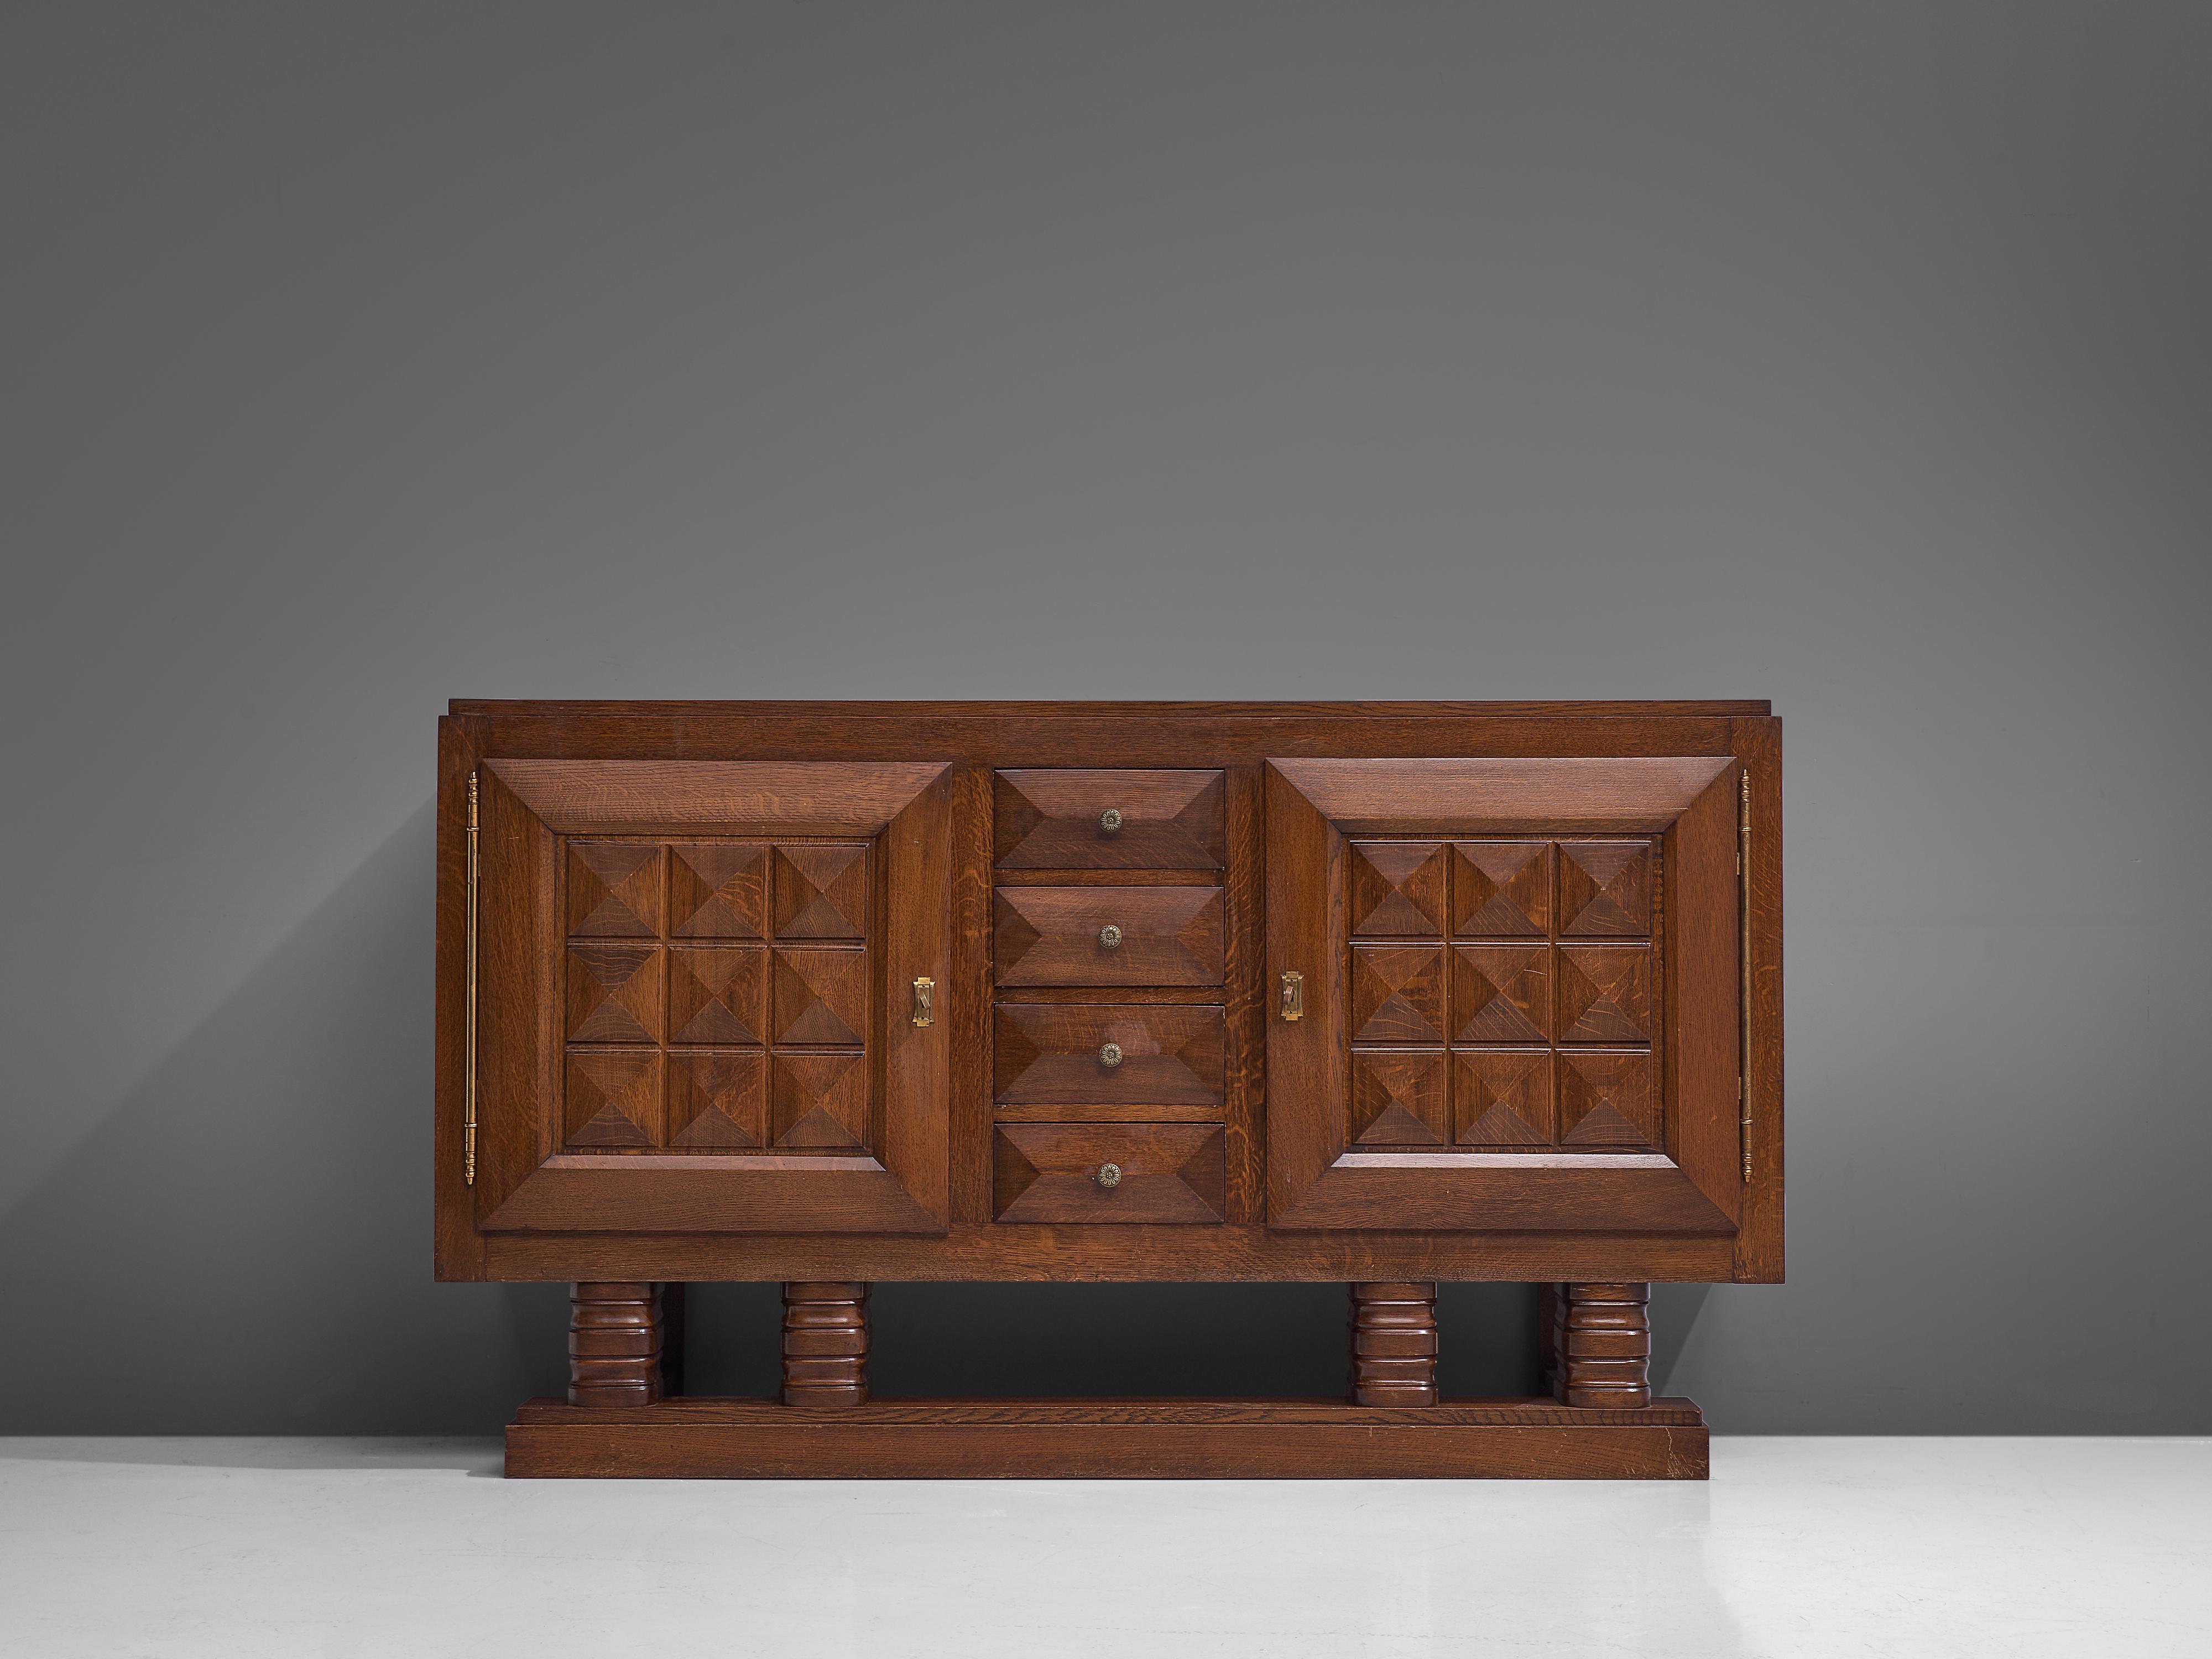 Gaston Poisson, sideboard, stained oak, brass, France, 1930s

Elegant and strong sideboard in stained oak with graphical door panels and drawers. The sideboard is equipped with drawers flanked by two doors. The door panels and base show the great